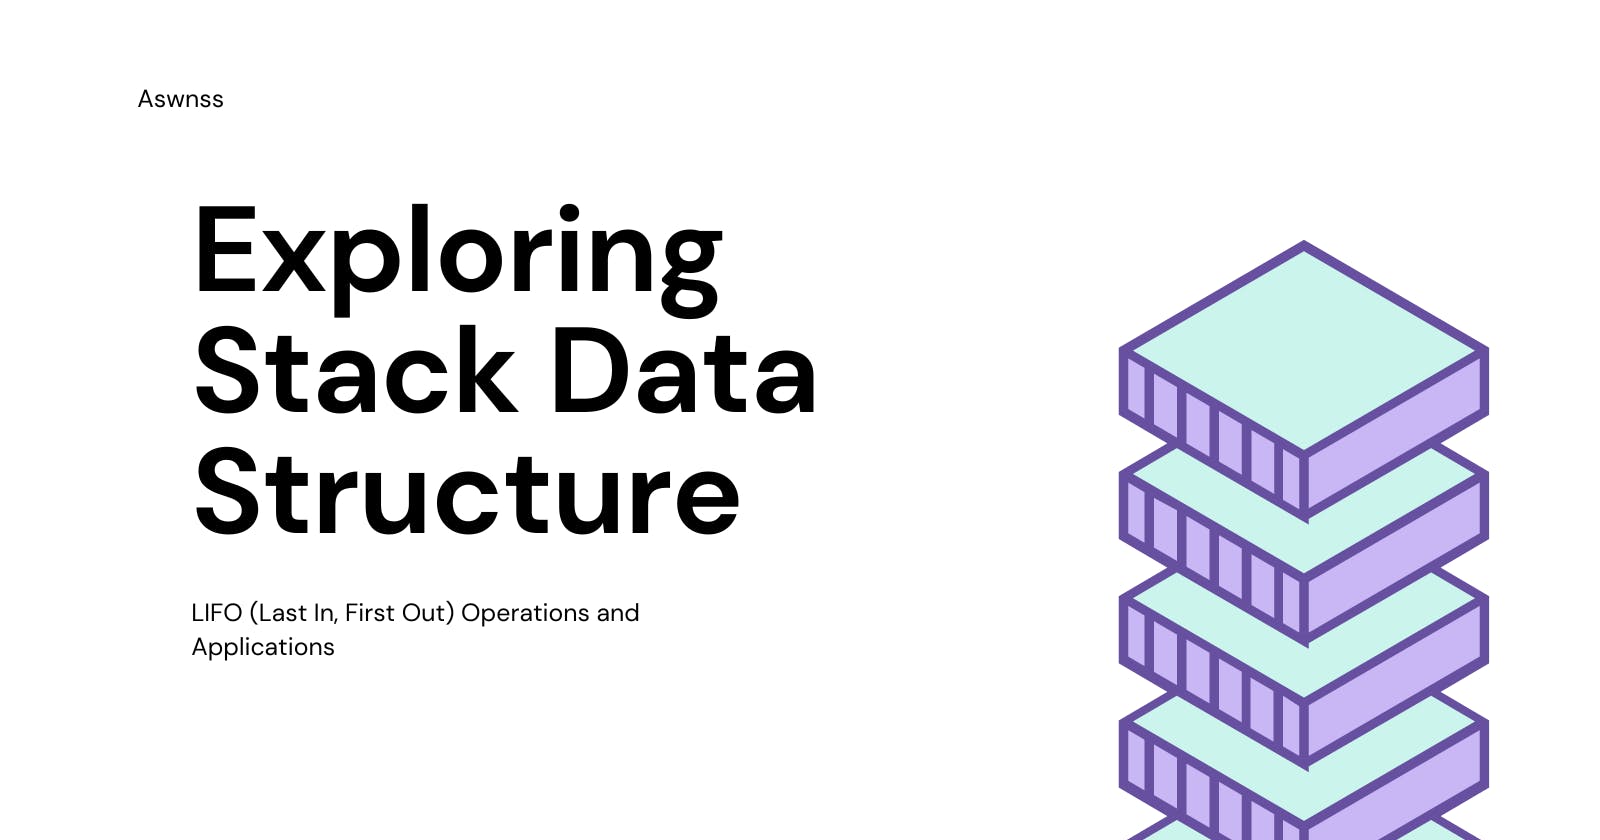 Exploring Stack Data Structure: LIFO (Last In, First Out) Operations and Applications